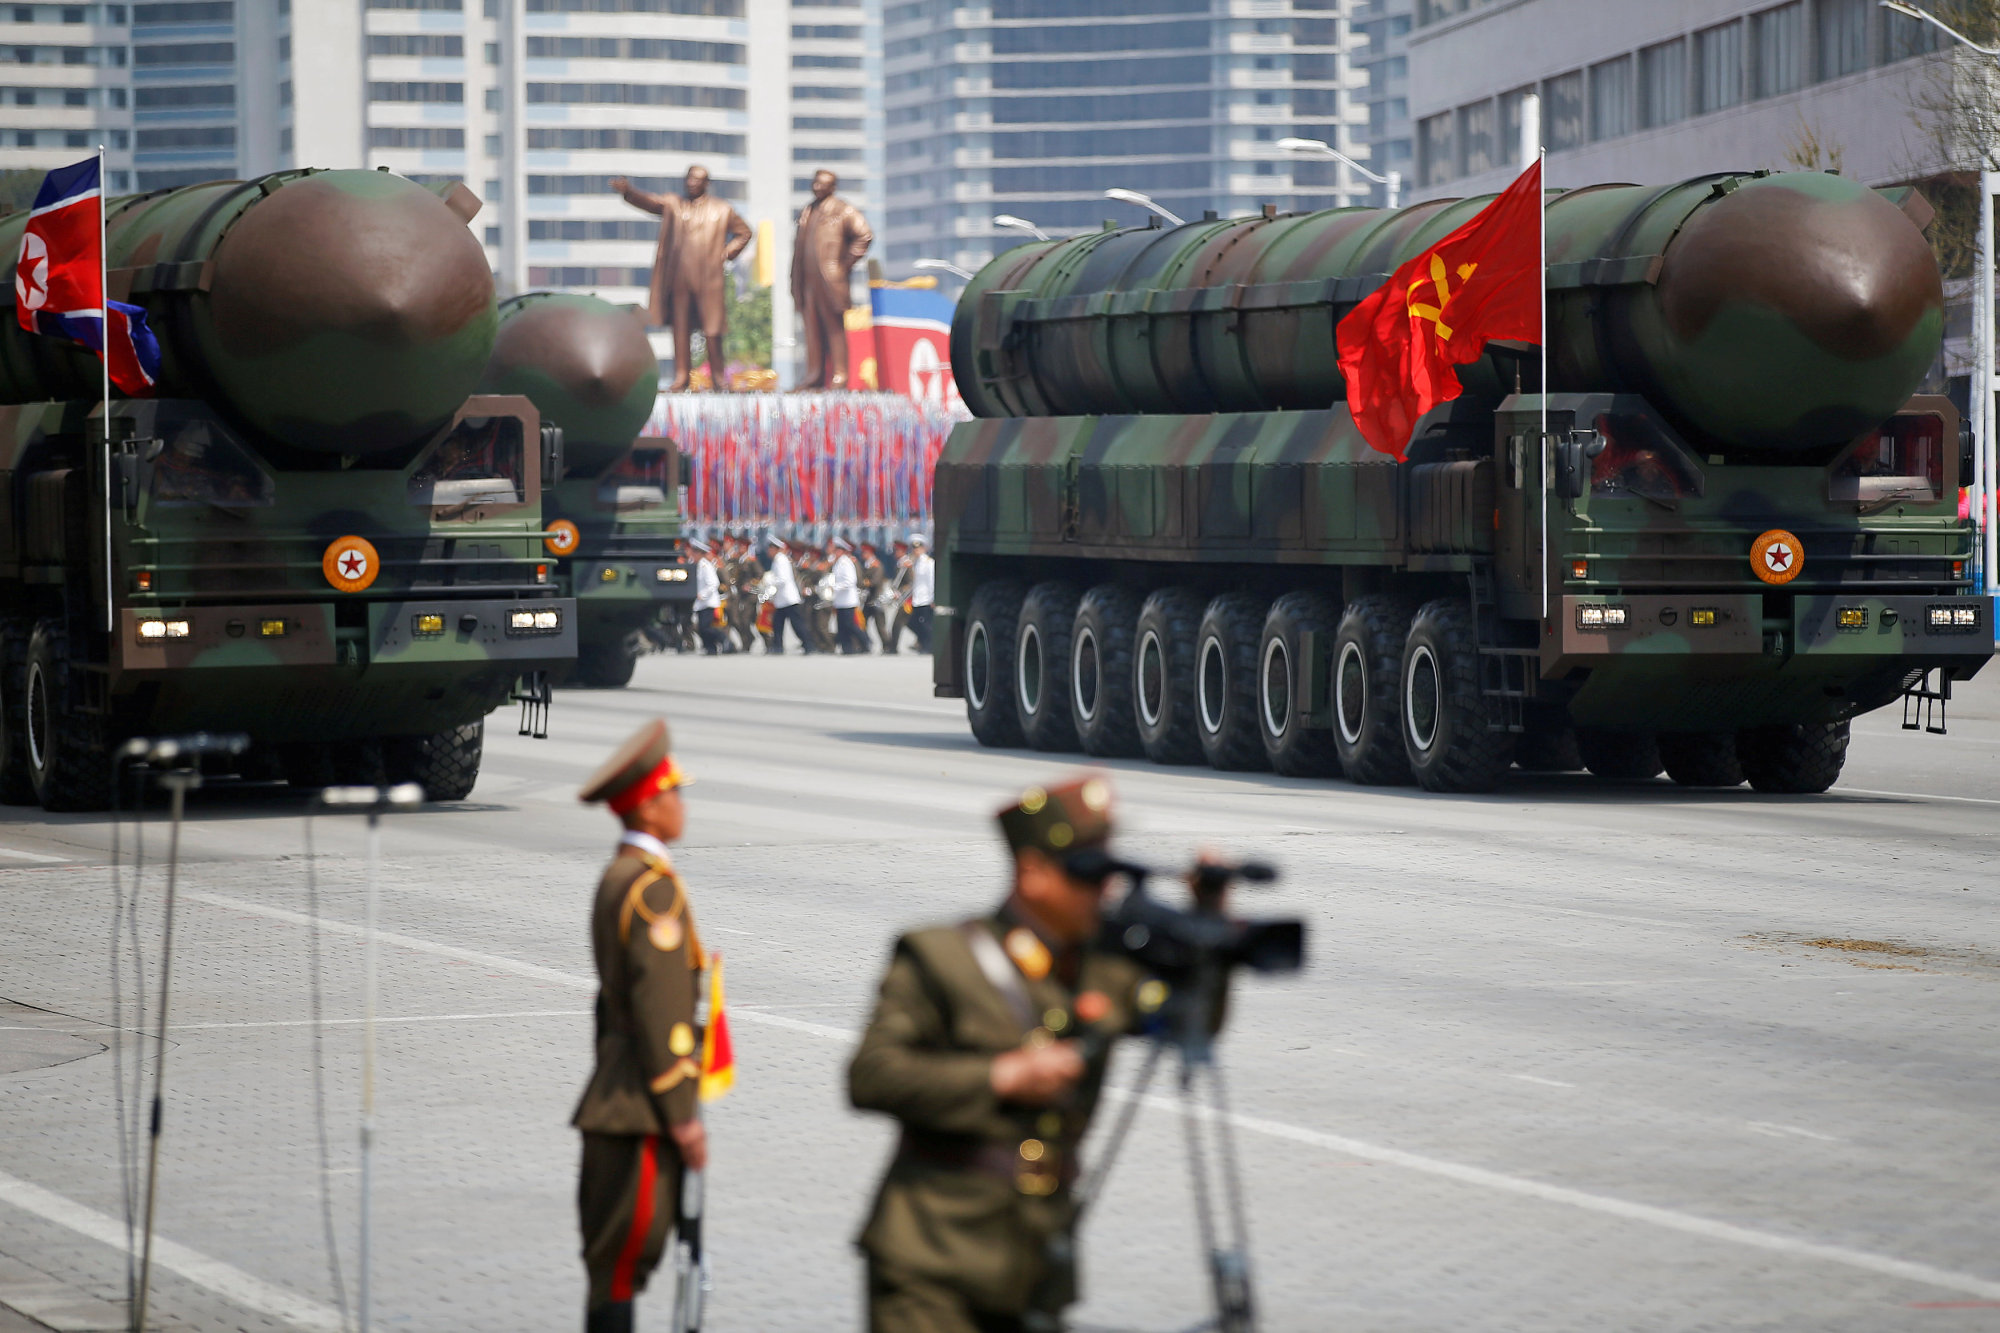 North Korean intercontinental ballistic missiles are seen during a military parade marking the 105th anniversary of the birth of the country's founder, Kim Il Sung, in Pyongyang in April 2017. | REUTERS